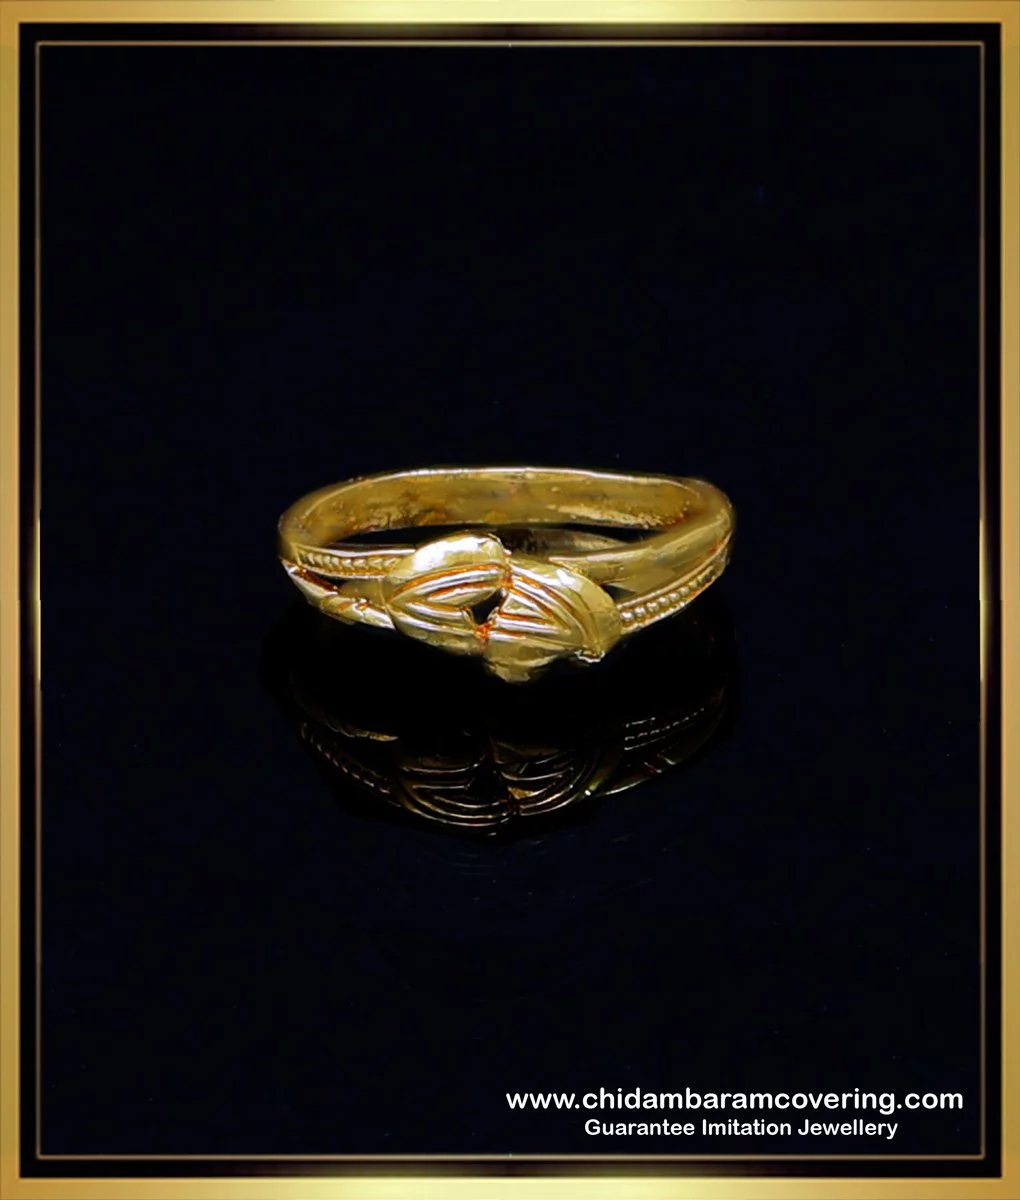 Daily Wear Gold Rings Designs For Women | My Jewellery Collection | Women Ring  Designs 2020 | Engage | Gold bangles design, Gold ring designs, Gold rings  fashion